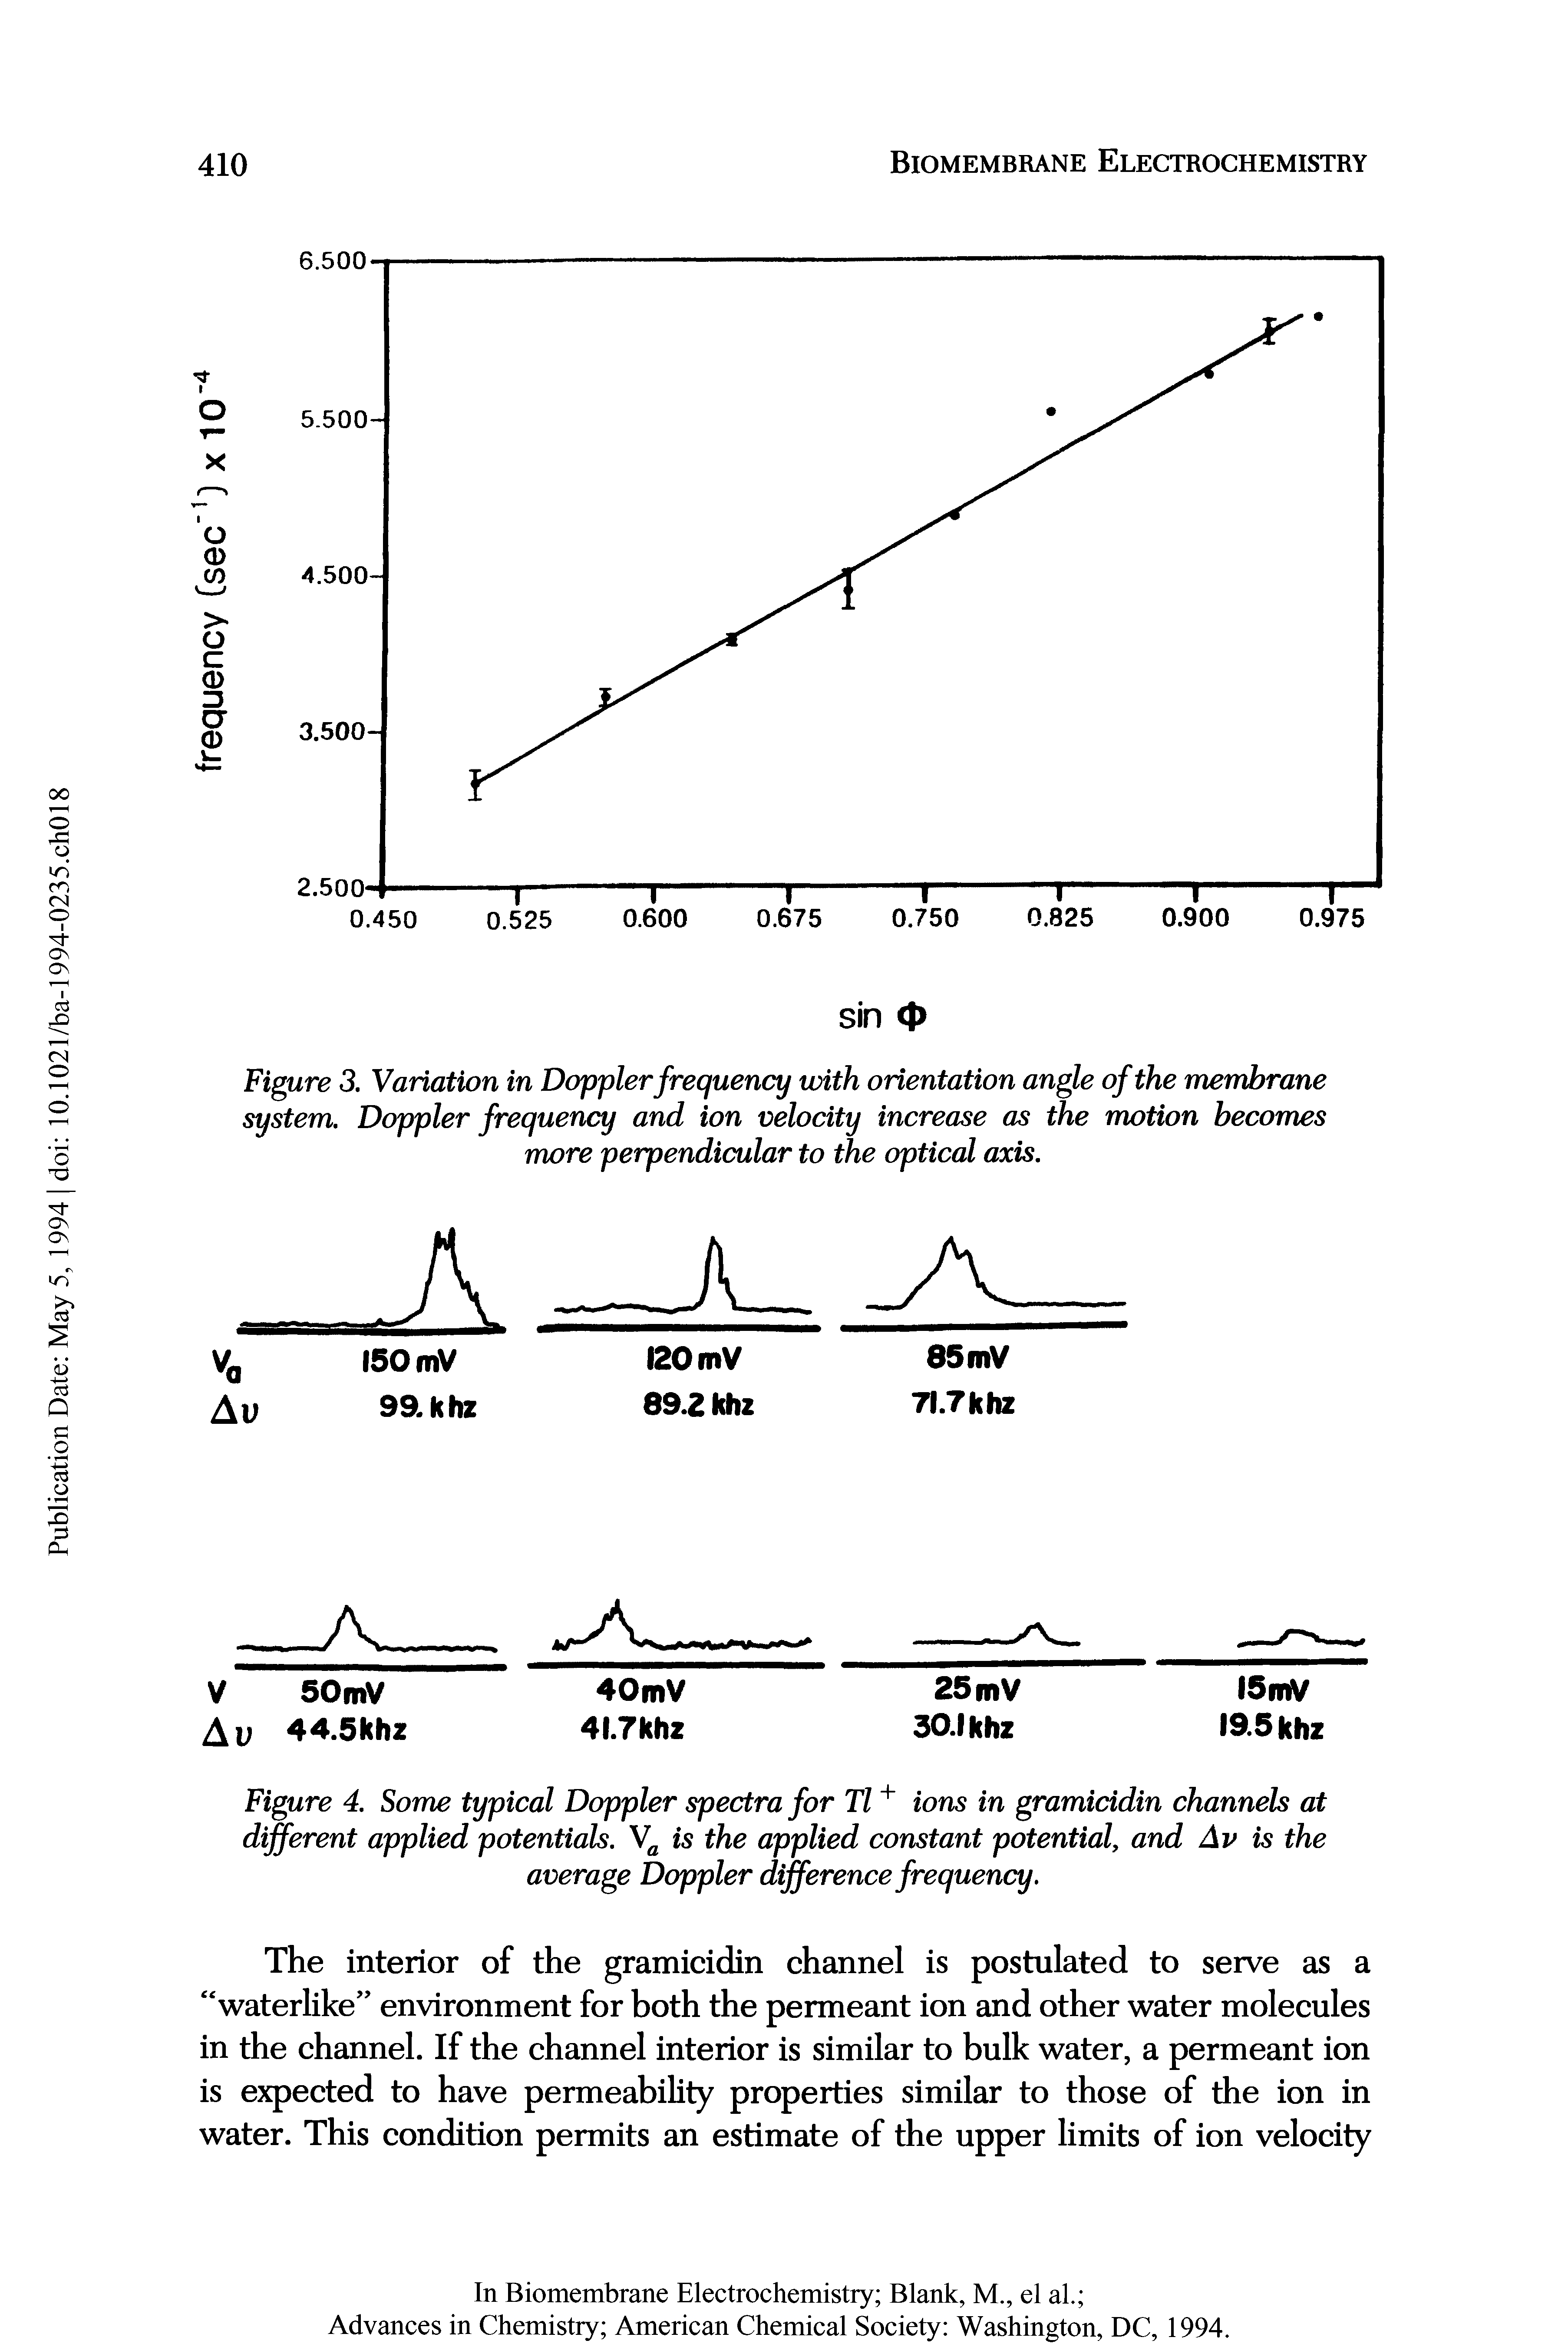 Figure 4. Some typical Doppler spectra for Tl+ ions in gramicidin channels at different applied potentials. Va is the applied constant potential, and Av is the average Doppler difference frequency.